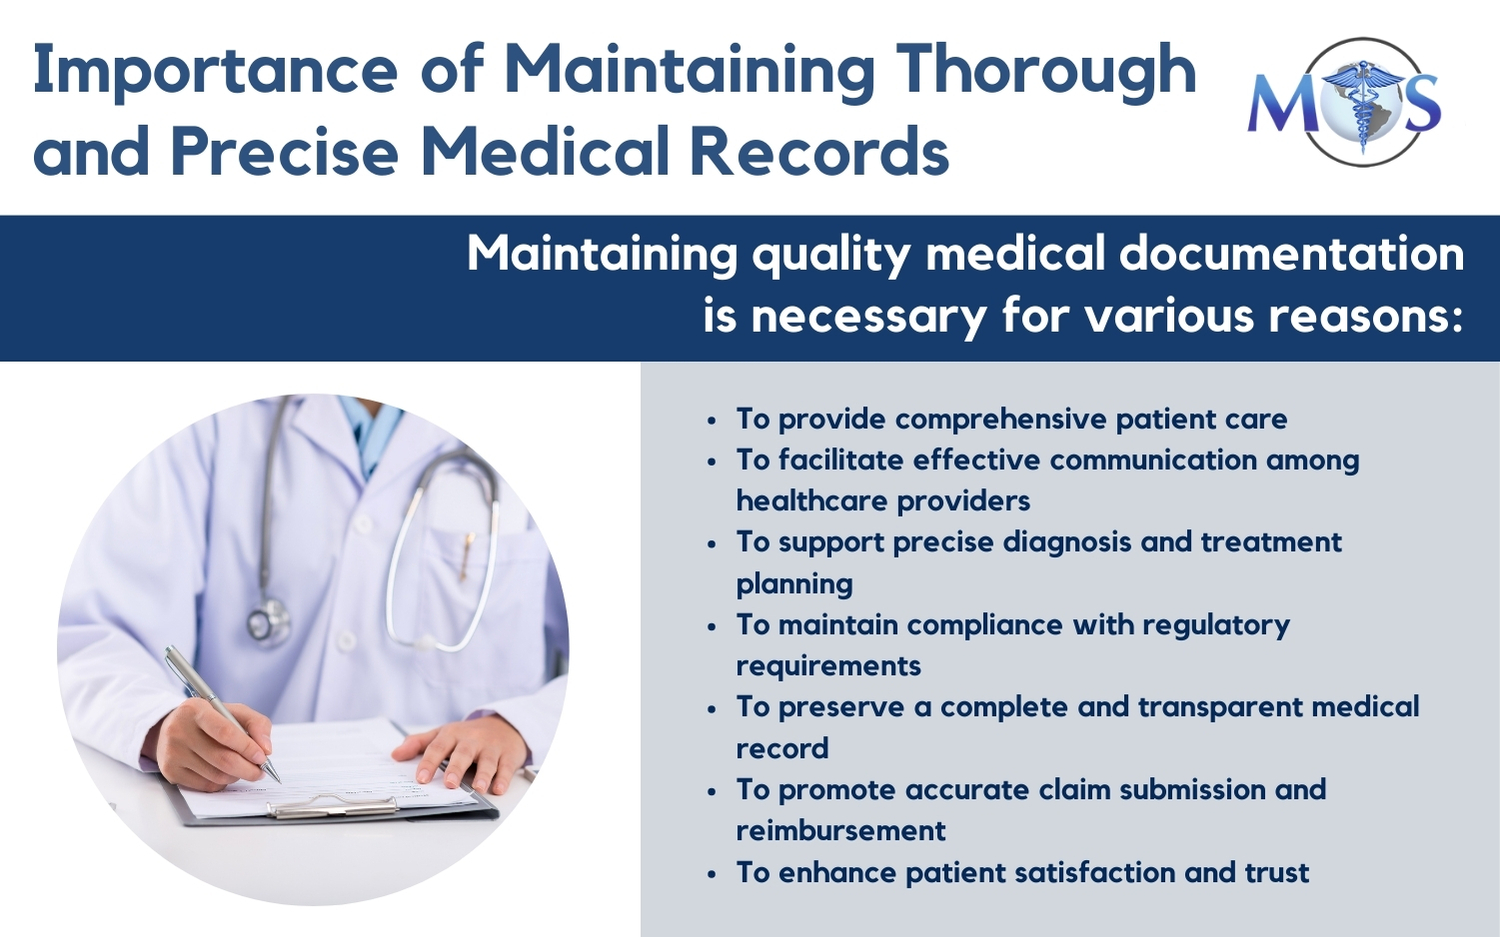 Thorough and Precise Medical Records